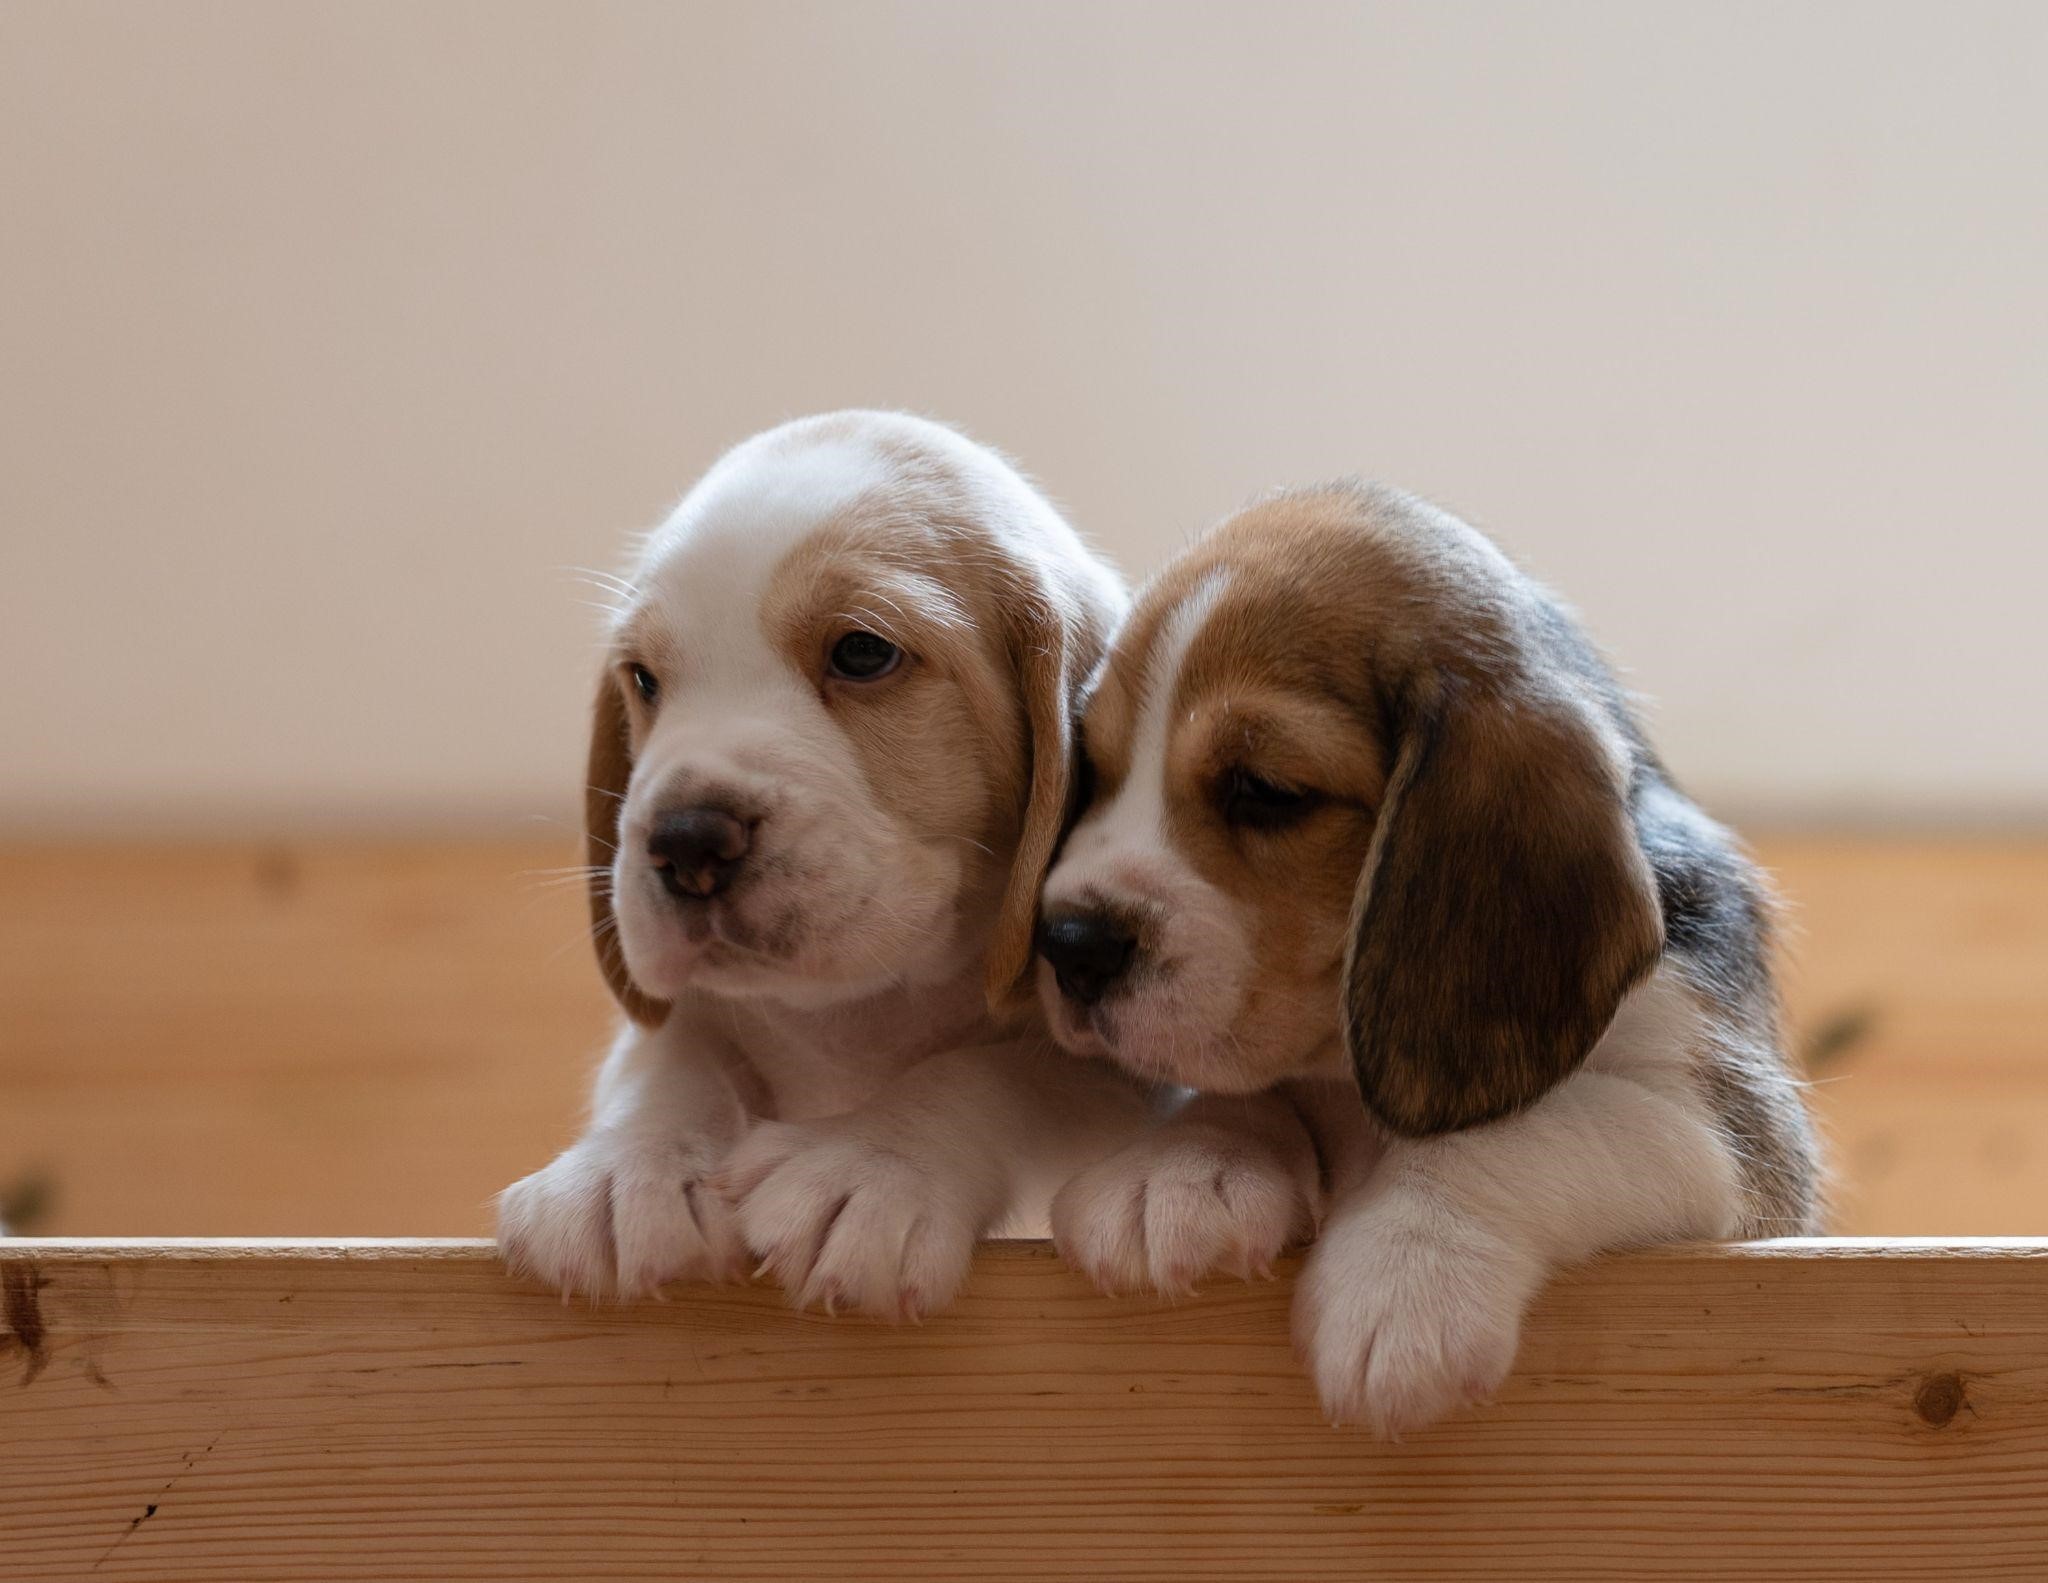 What You Should Know Before Selling or Giving a Puppy Away in Australia